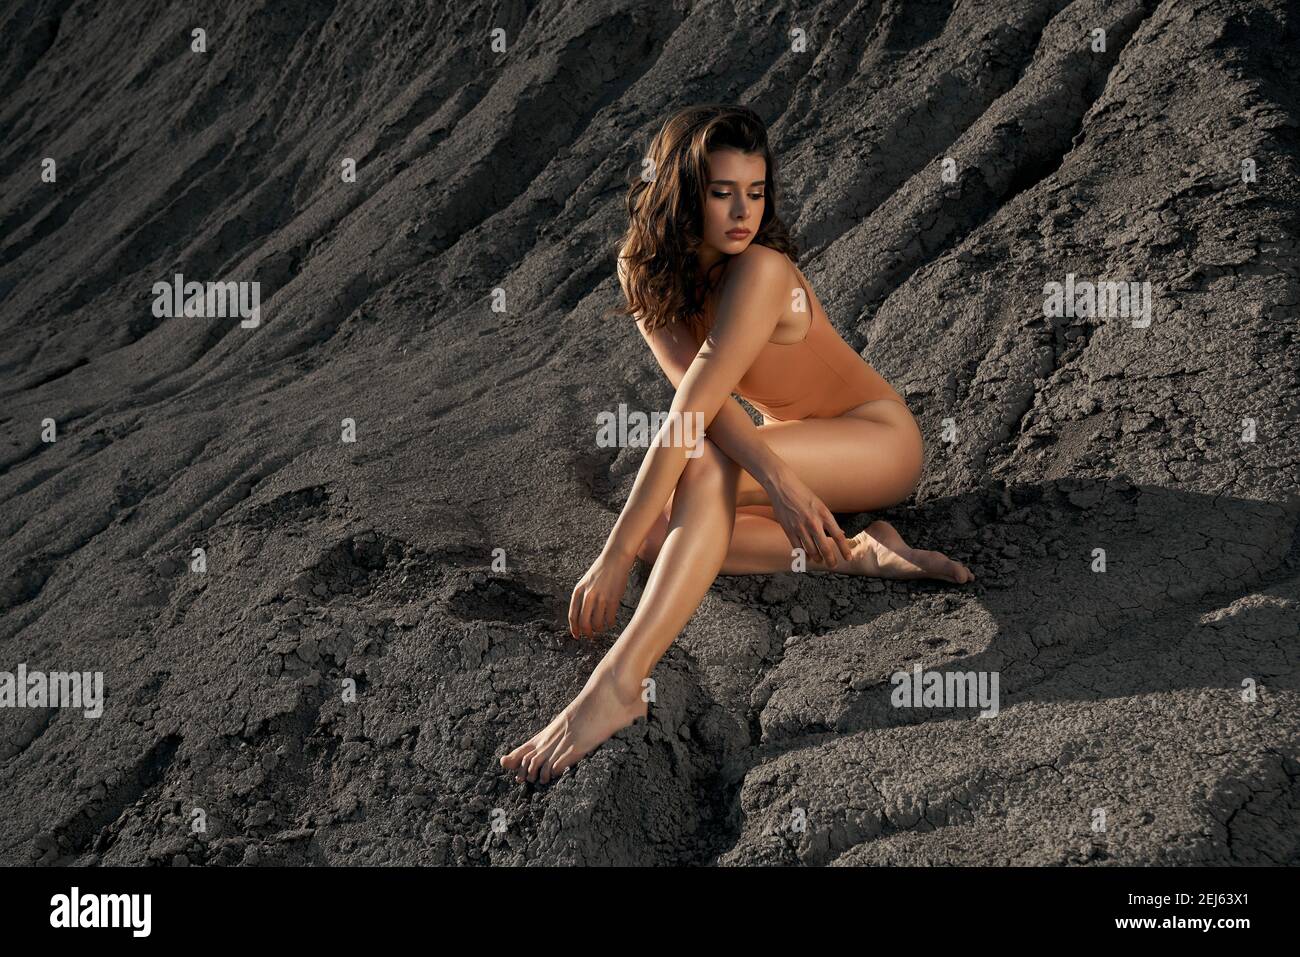 Side view of astonishing beautiful caucasian female model wearing beige body posing in dry empty quarry in hot summer sunny day. Young barefoot stylish woman sitting on black sand outdoors. Stock Photo